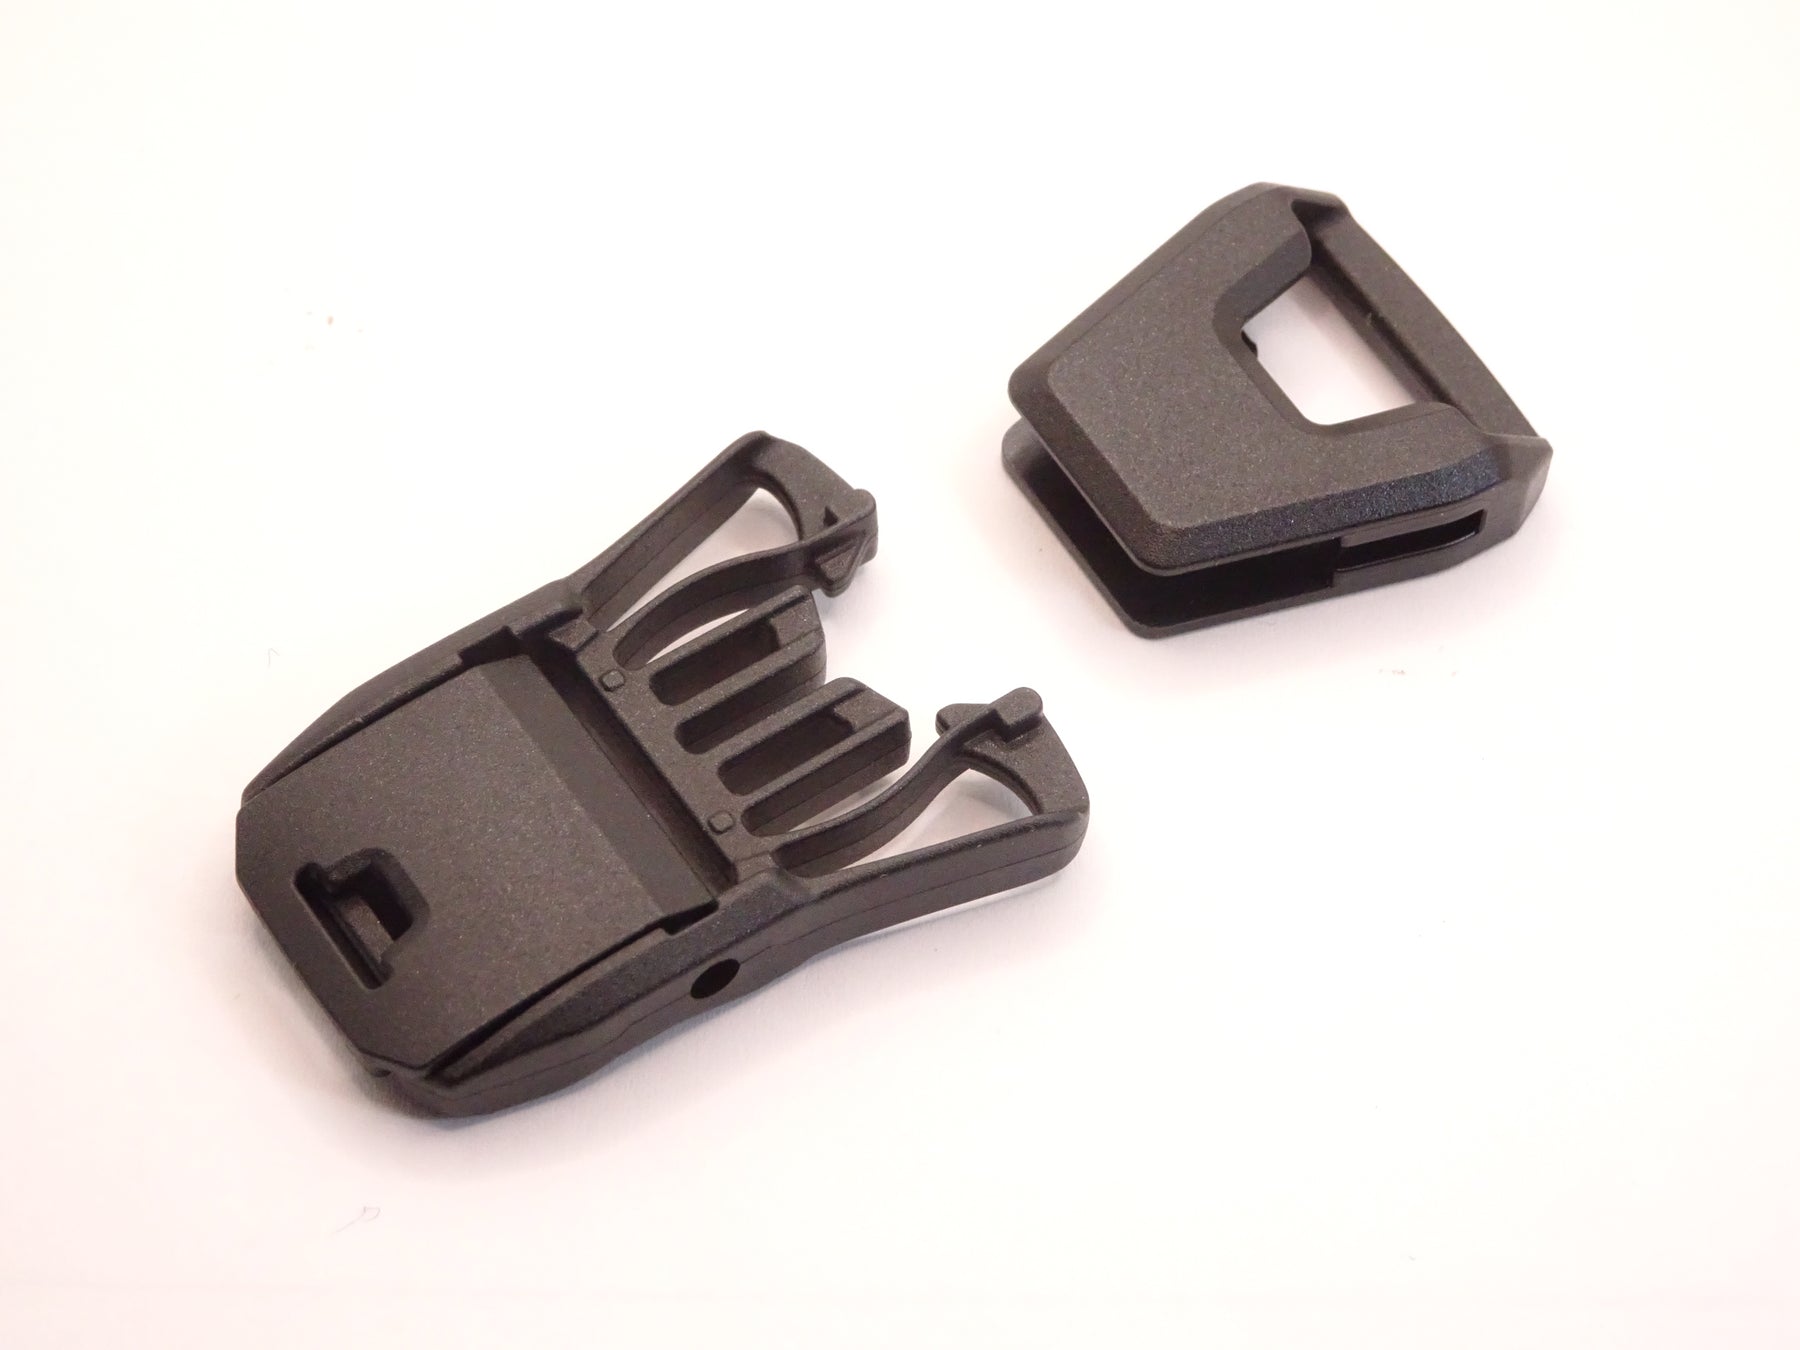 Z Buckle with Cam - 20mm